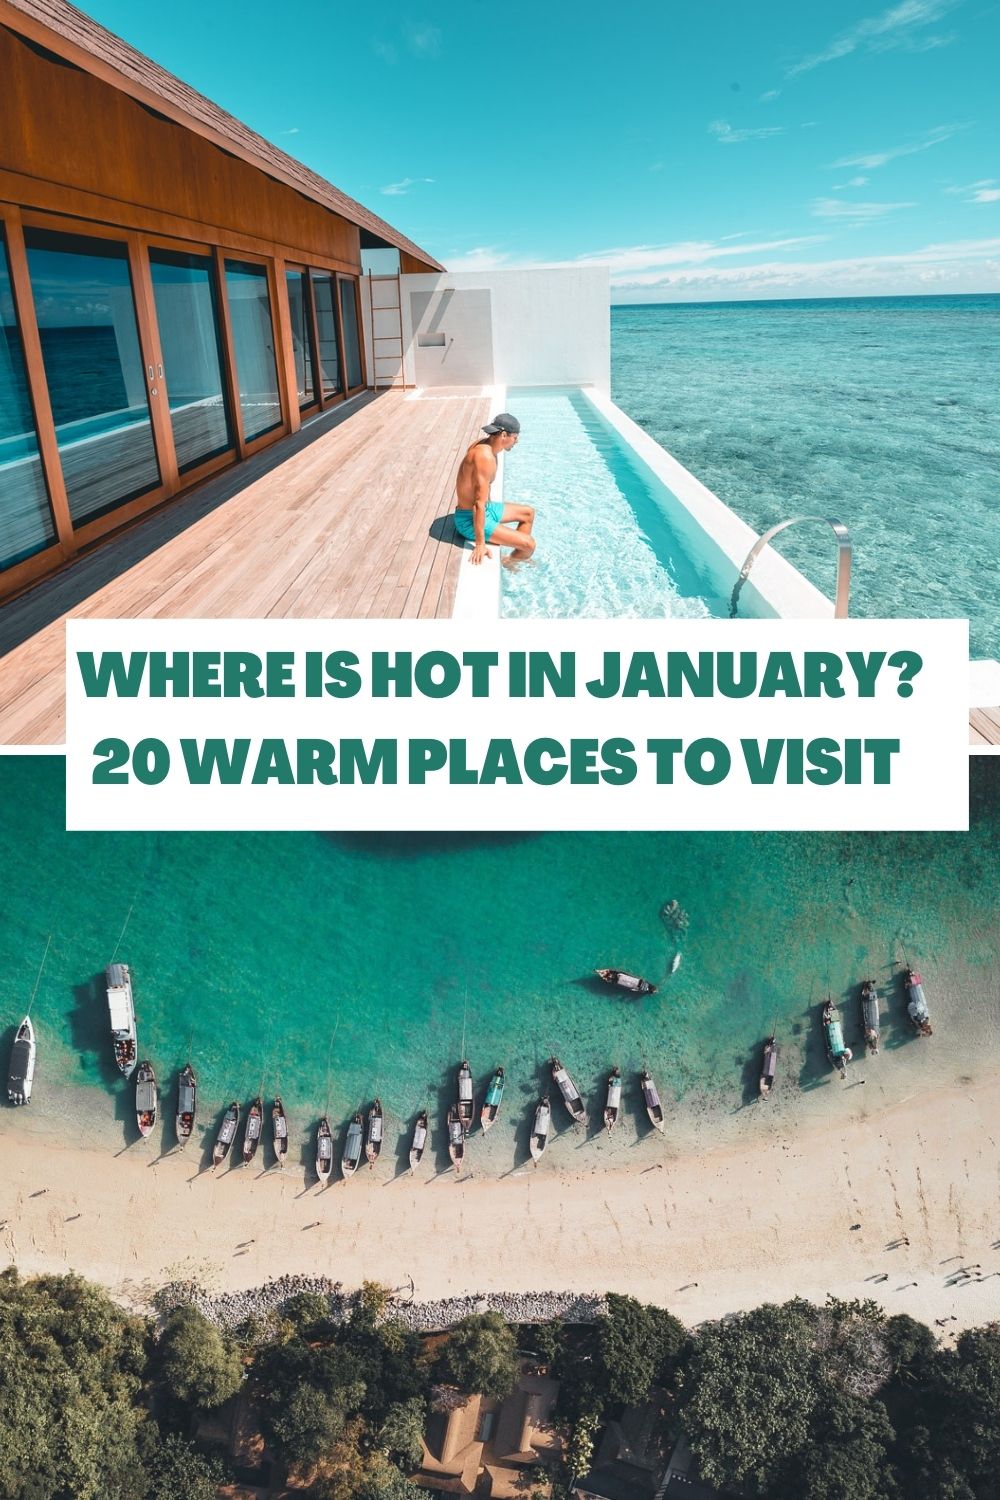 20 Warm Places to Visit in January